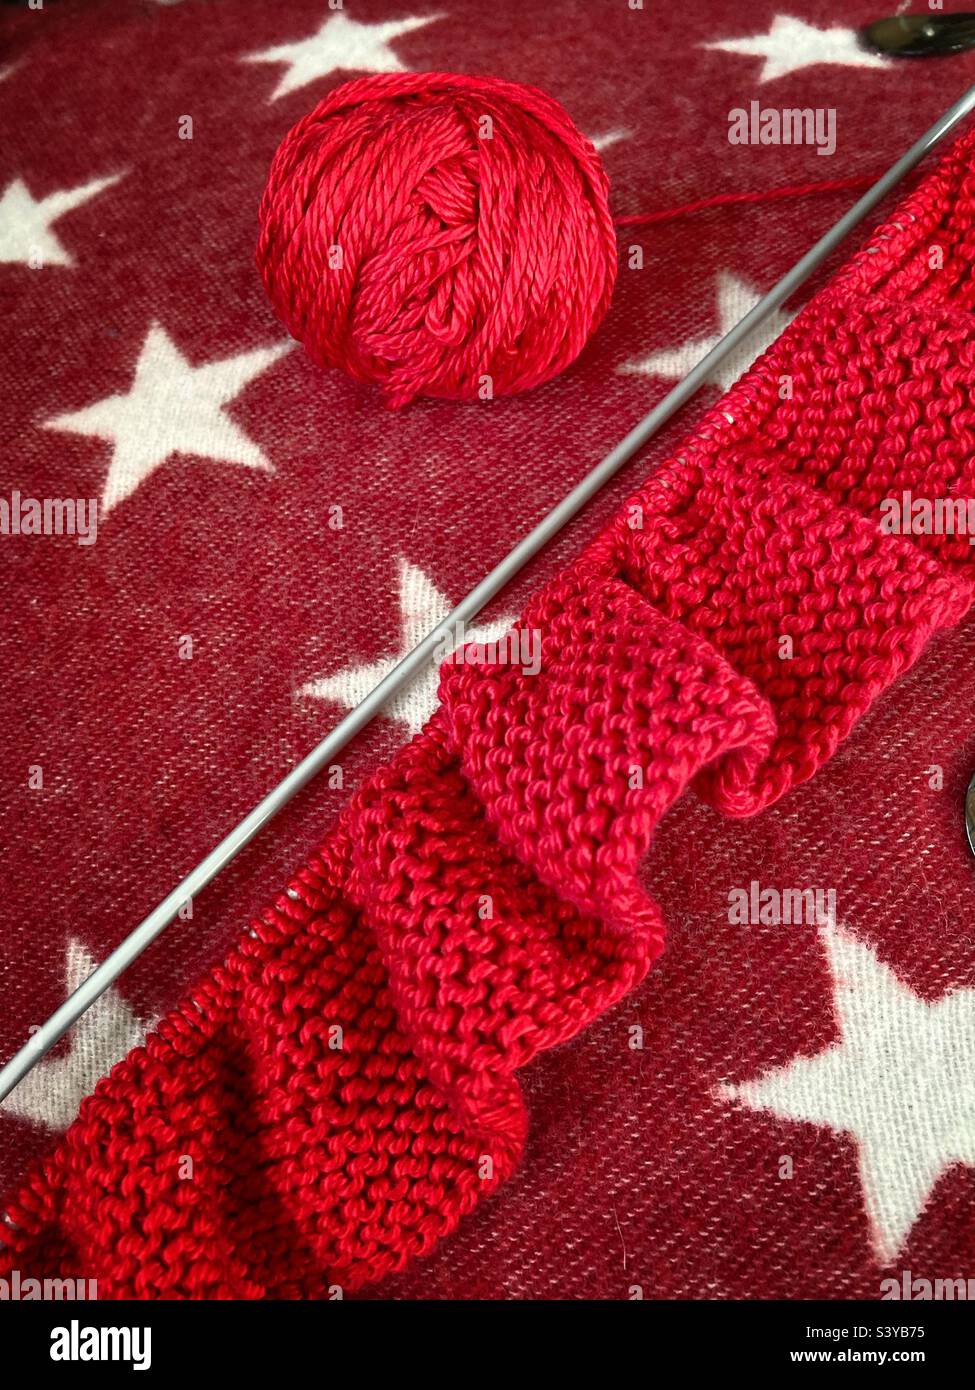 Winter knitting with red wool Stock Photo